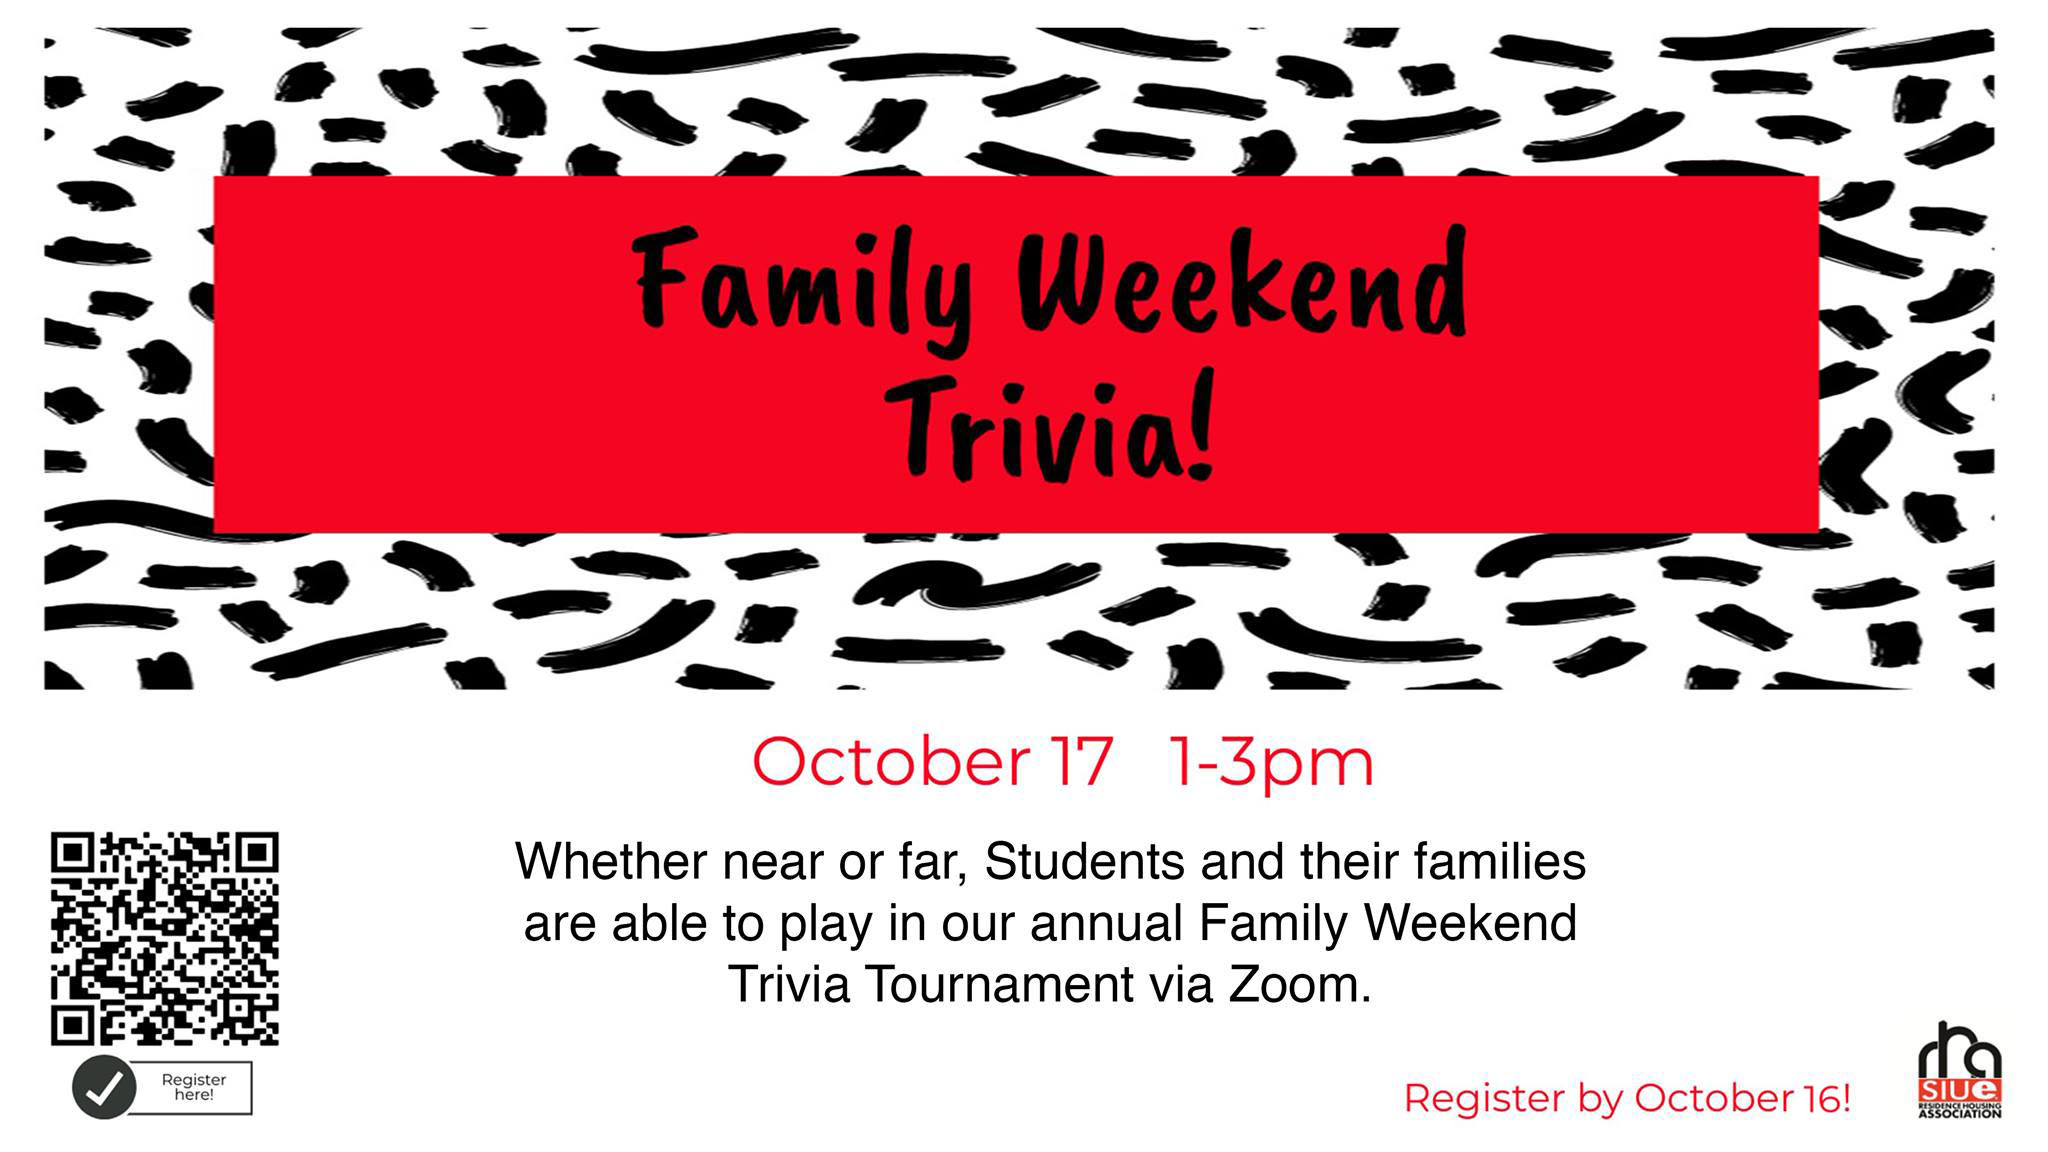 Family Weekend Trivia